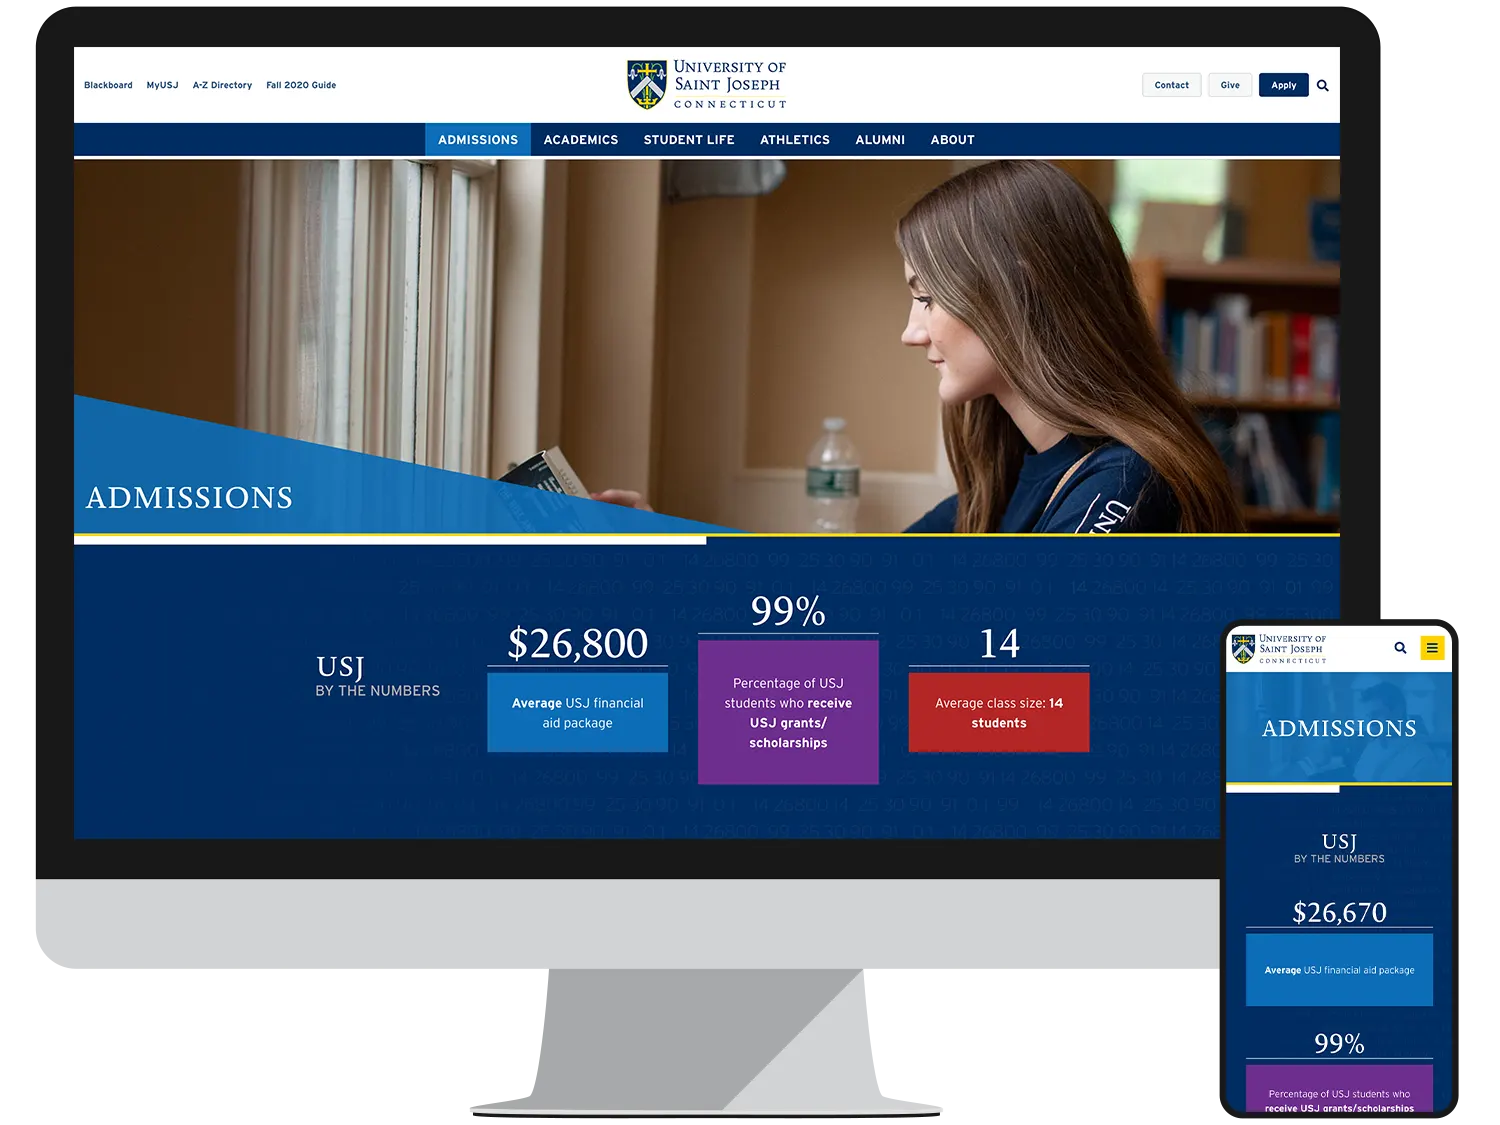 Landing Page - Admissions